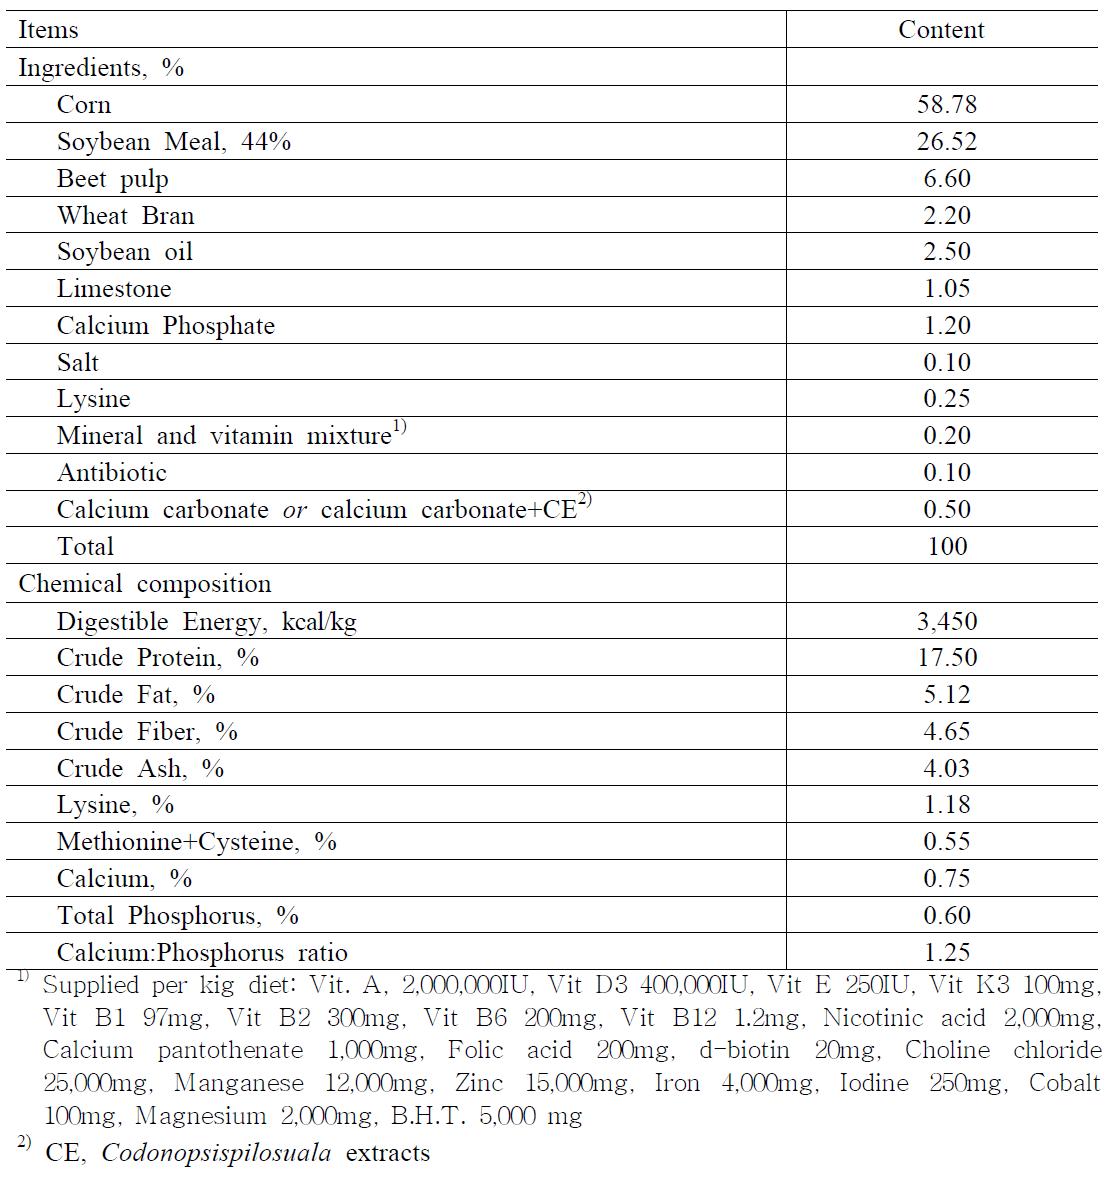 Ingredients and chemical composition of the experimental diets